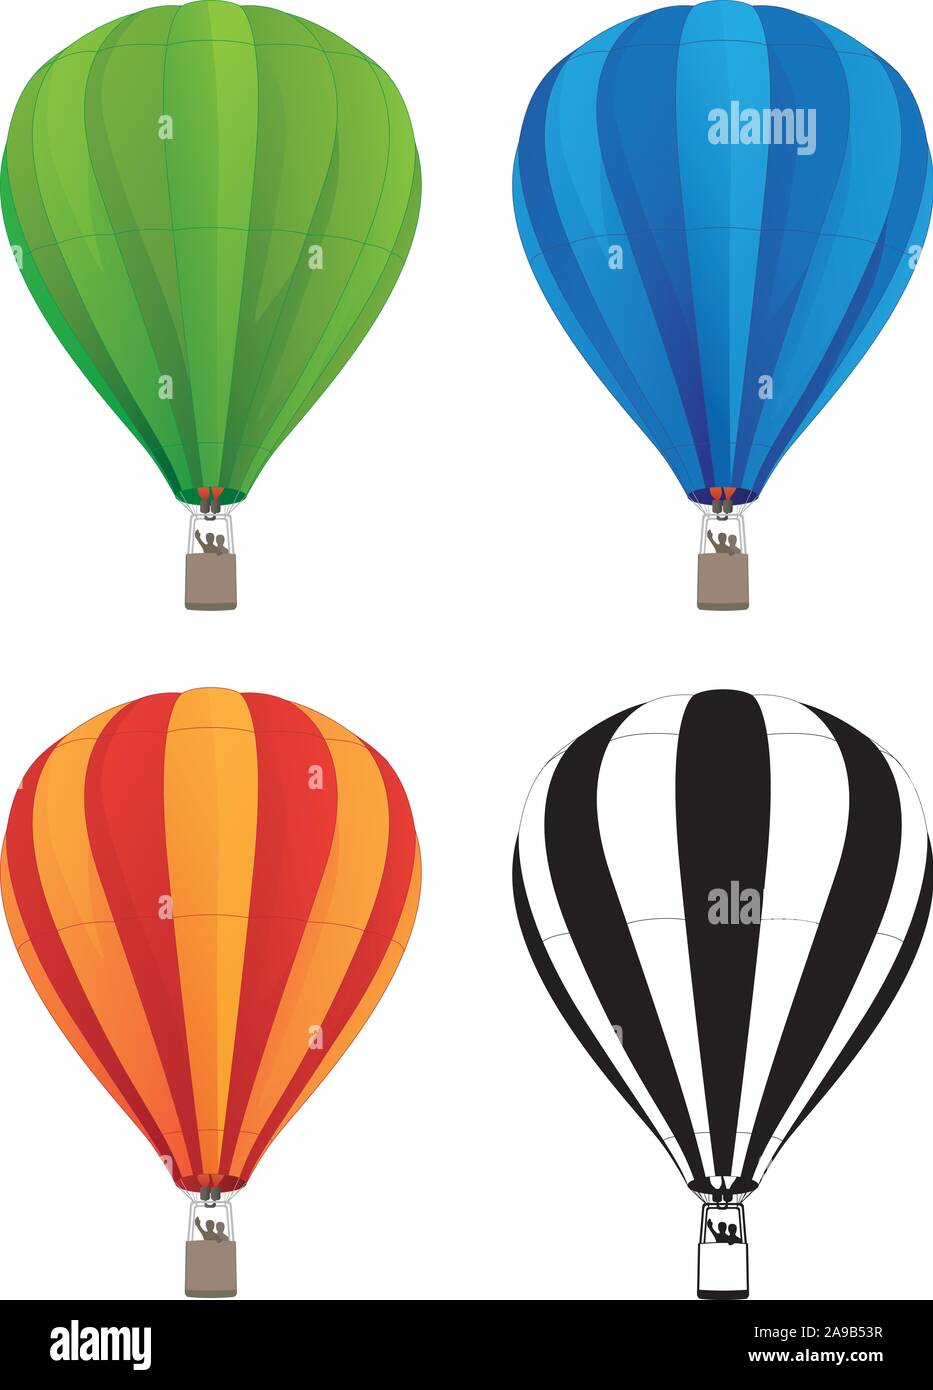 Hot Air Balloon Set in Green, Blue, Red Orange, and Black Line Art, Isolated Vector Illustration Stock Vector